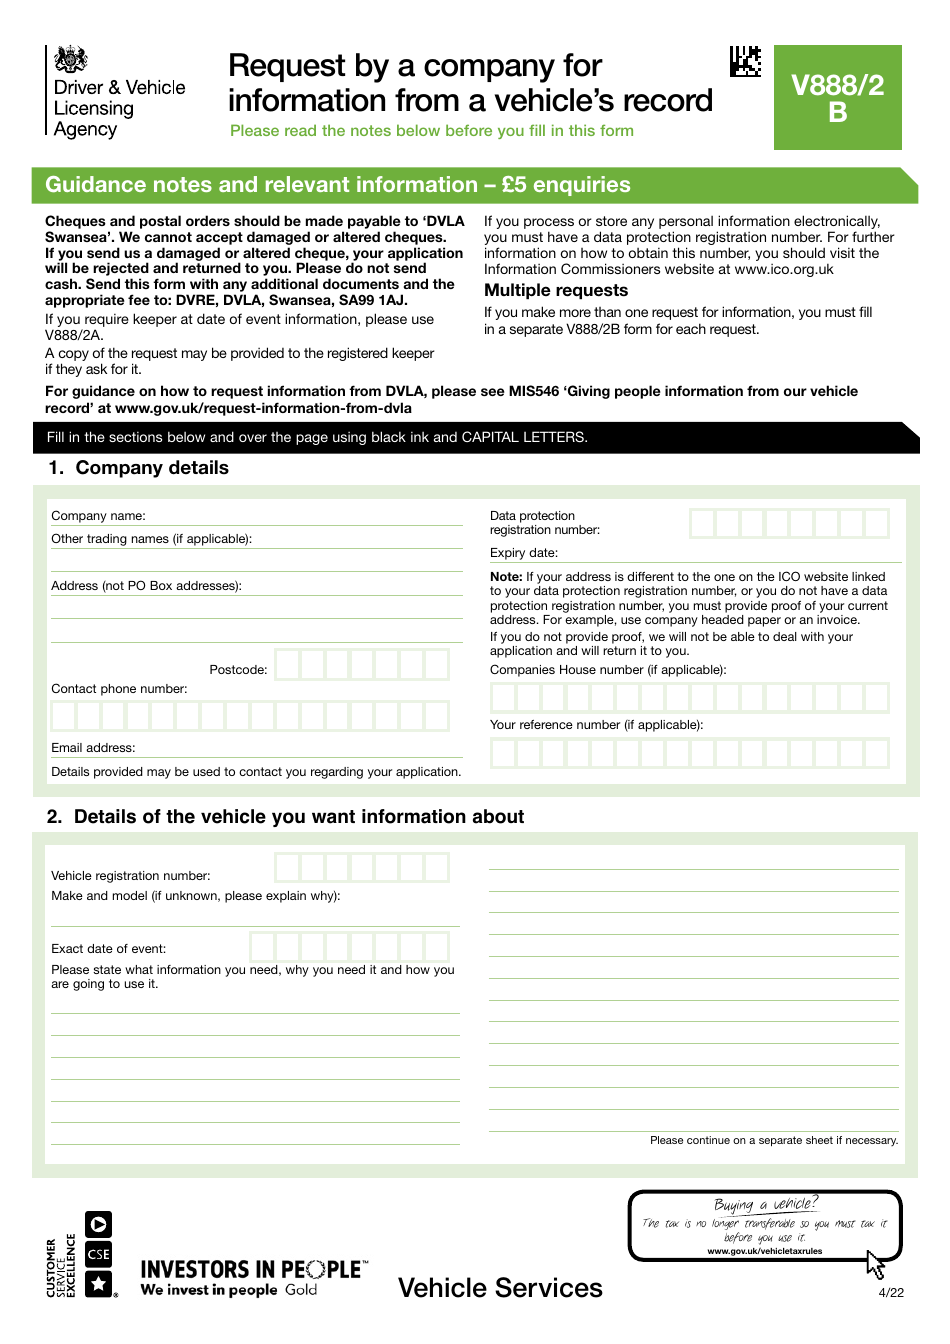 Form V888 / 2B Request by a Company for Information From a Vehicles Record - United Kingdom, Page 1